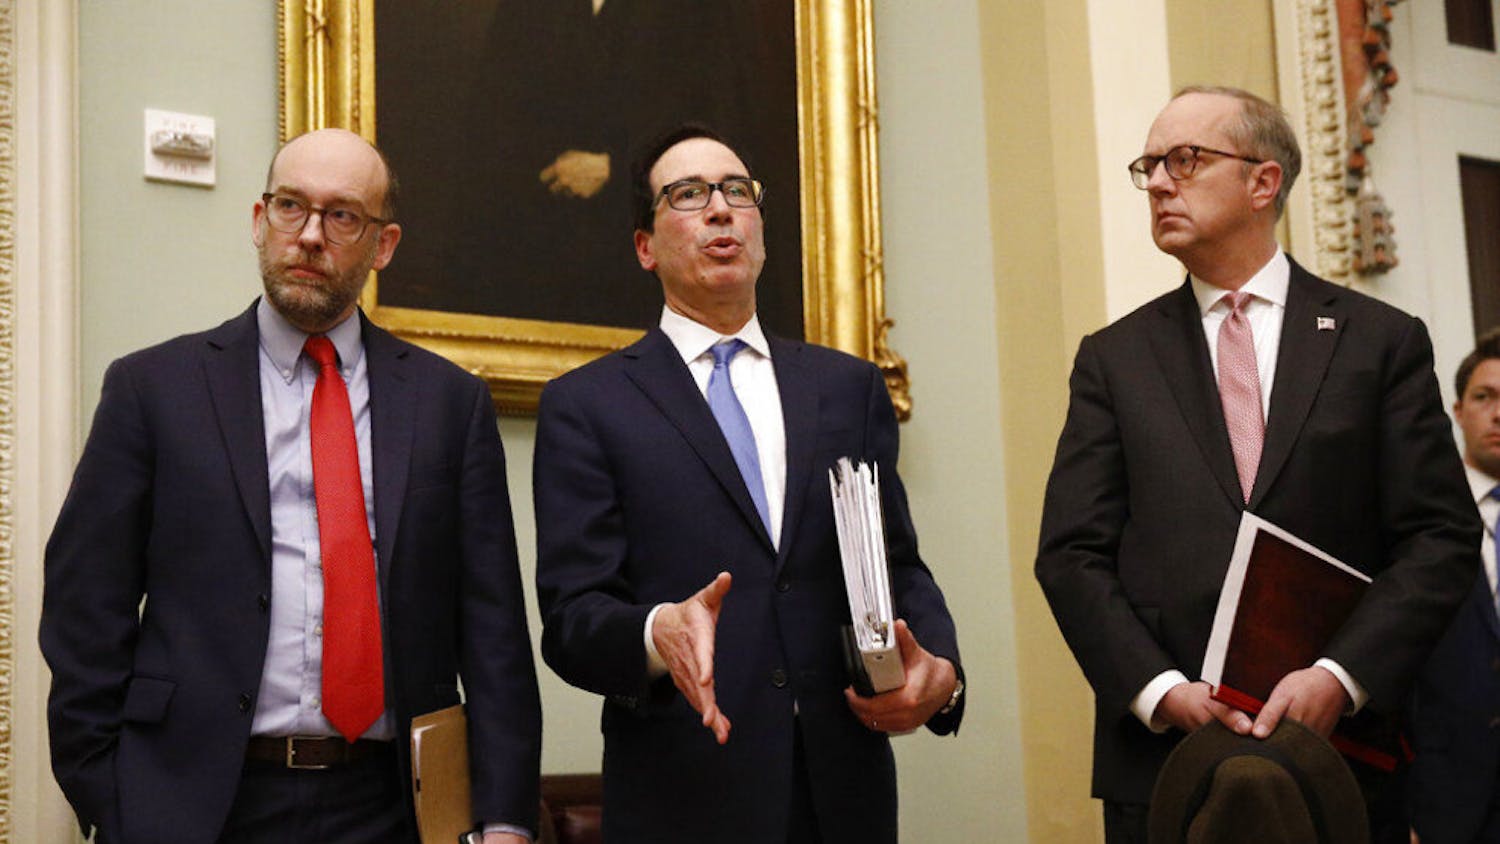 Treasury Secretary Steve Mnuchin, center, speaks with members of the media as he departs a meeting with Senate Republicans on an economic lifeline for Americans affected by the coronavirus outbreak. on Capitol Hill in Washington, Monday, March 16, 2020. (AP Photo/Patrick Semansky)